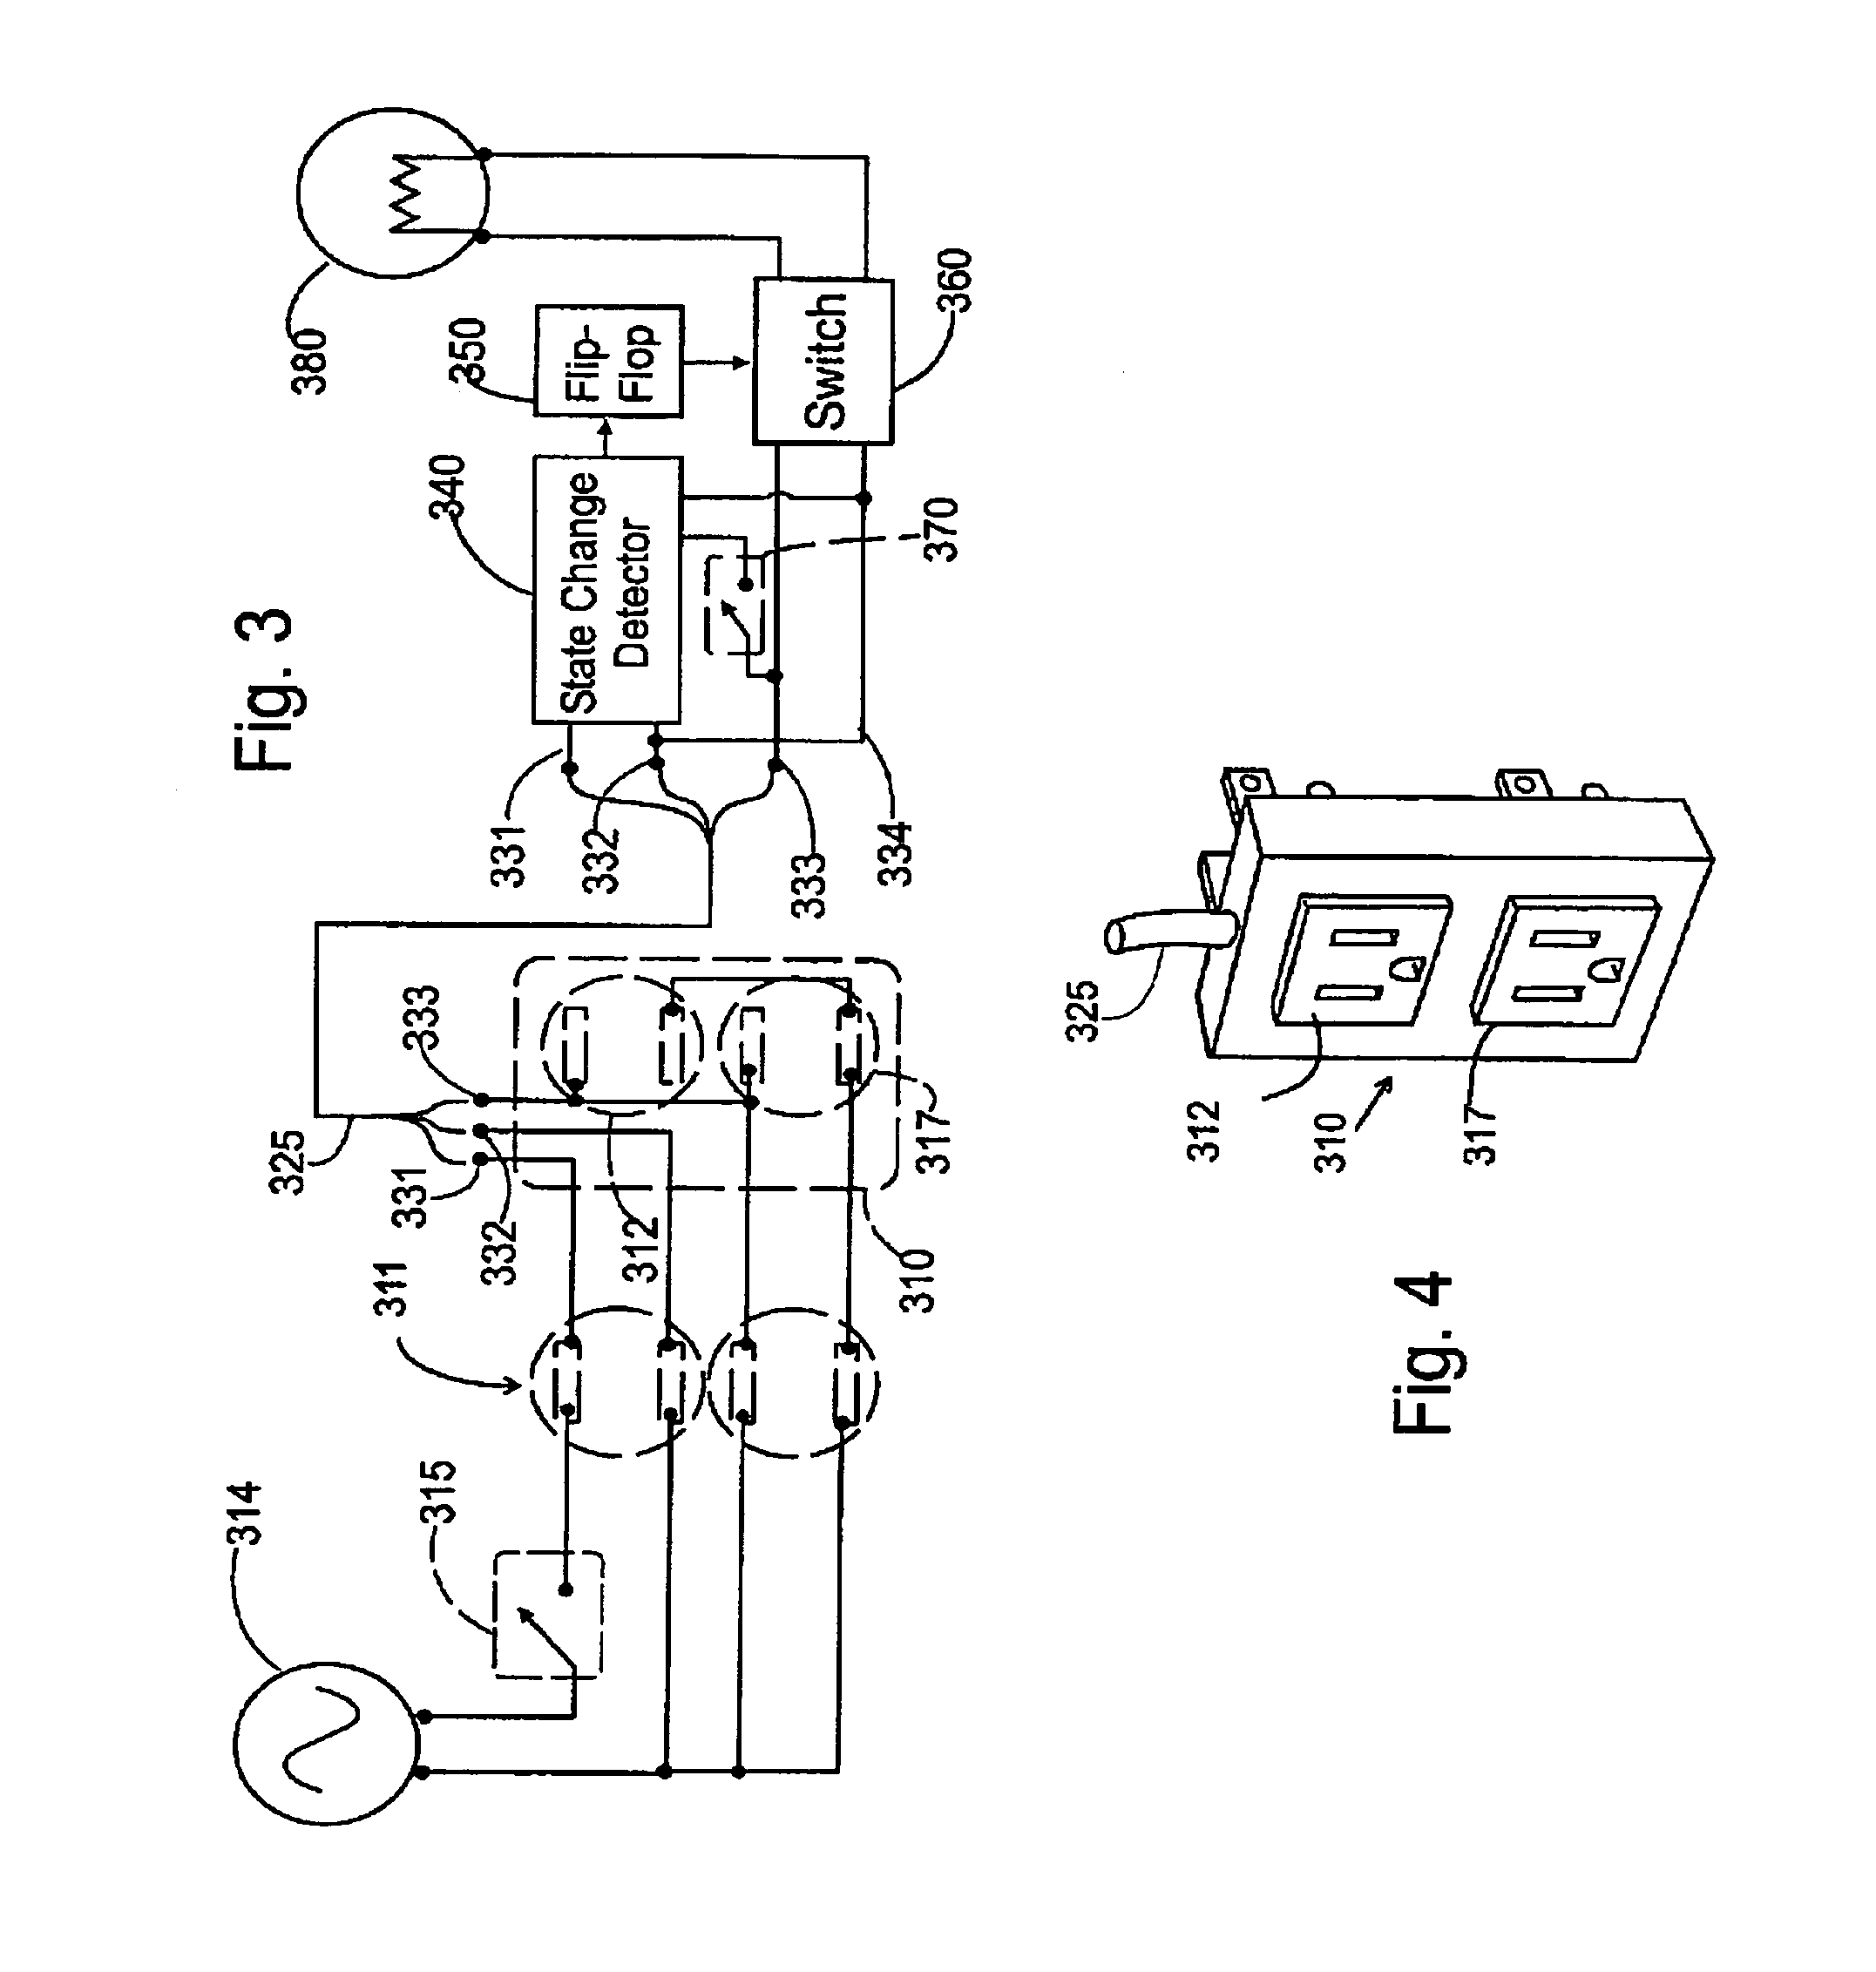 Control circuit for turning a device on or off using a conventional wall switch or a device switch